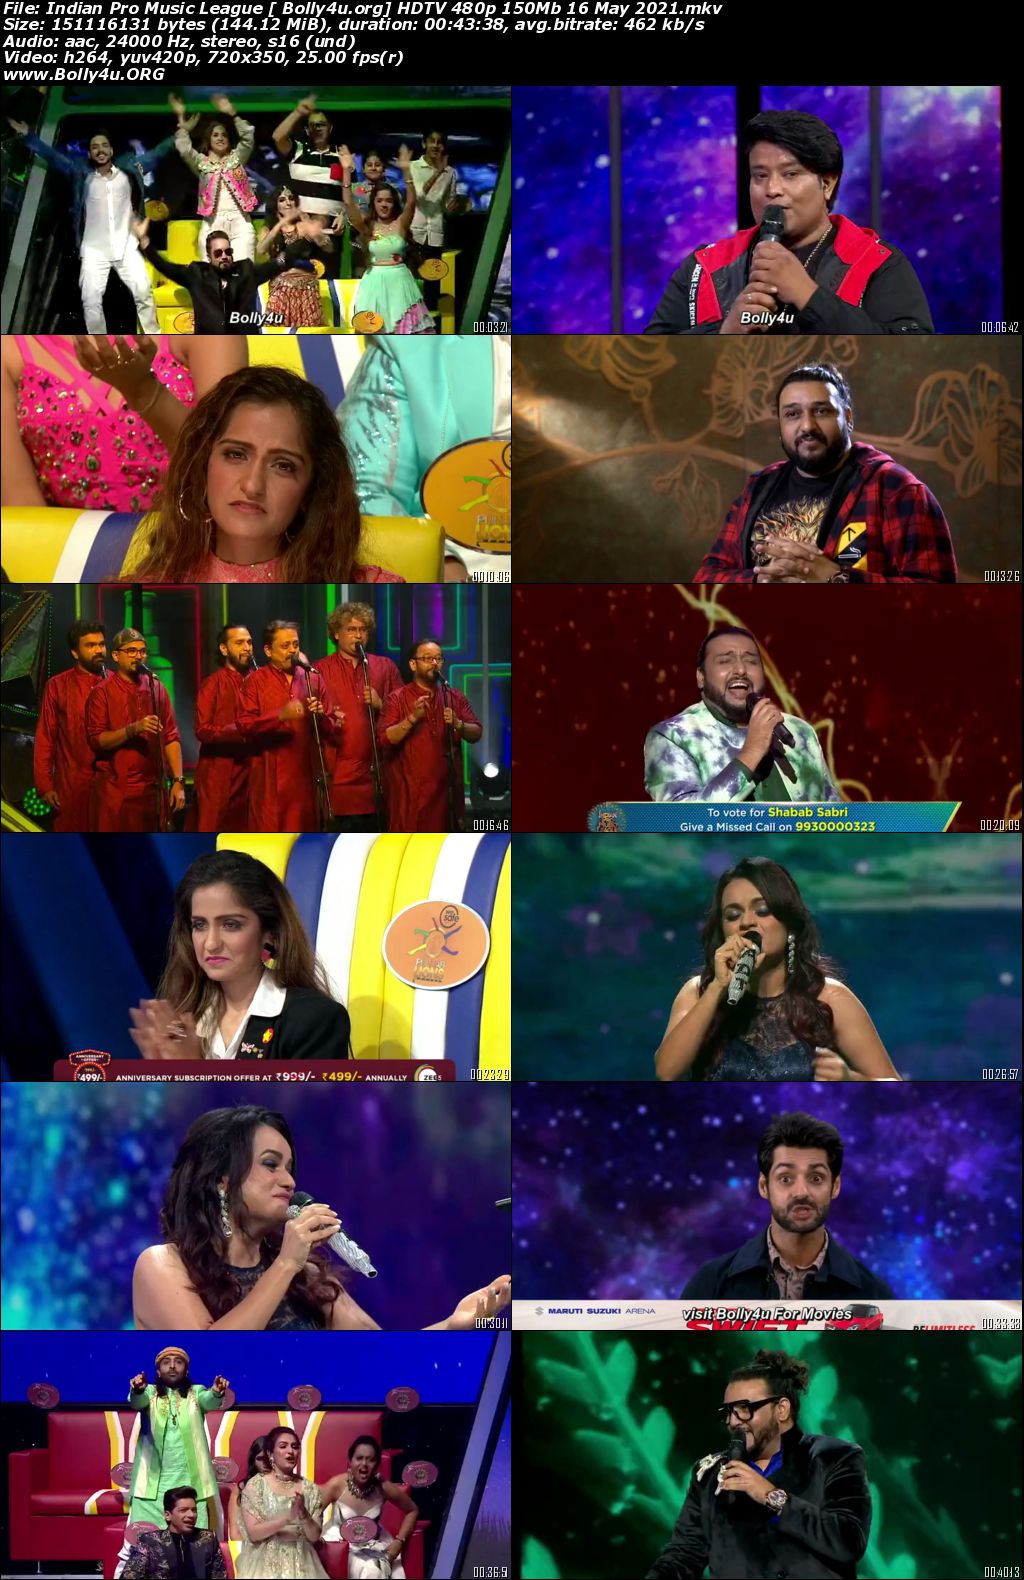 Indian Pro Music League HDTV 480p 150Mb 16 May 2021 Download